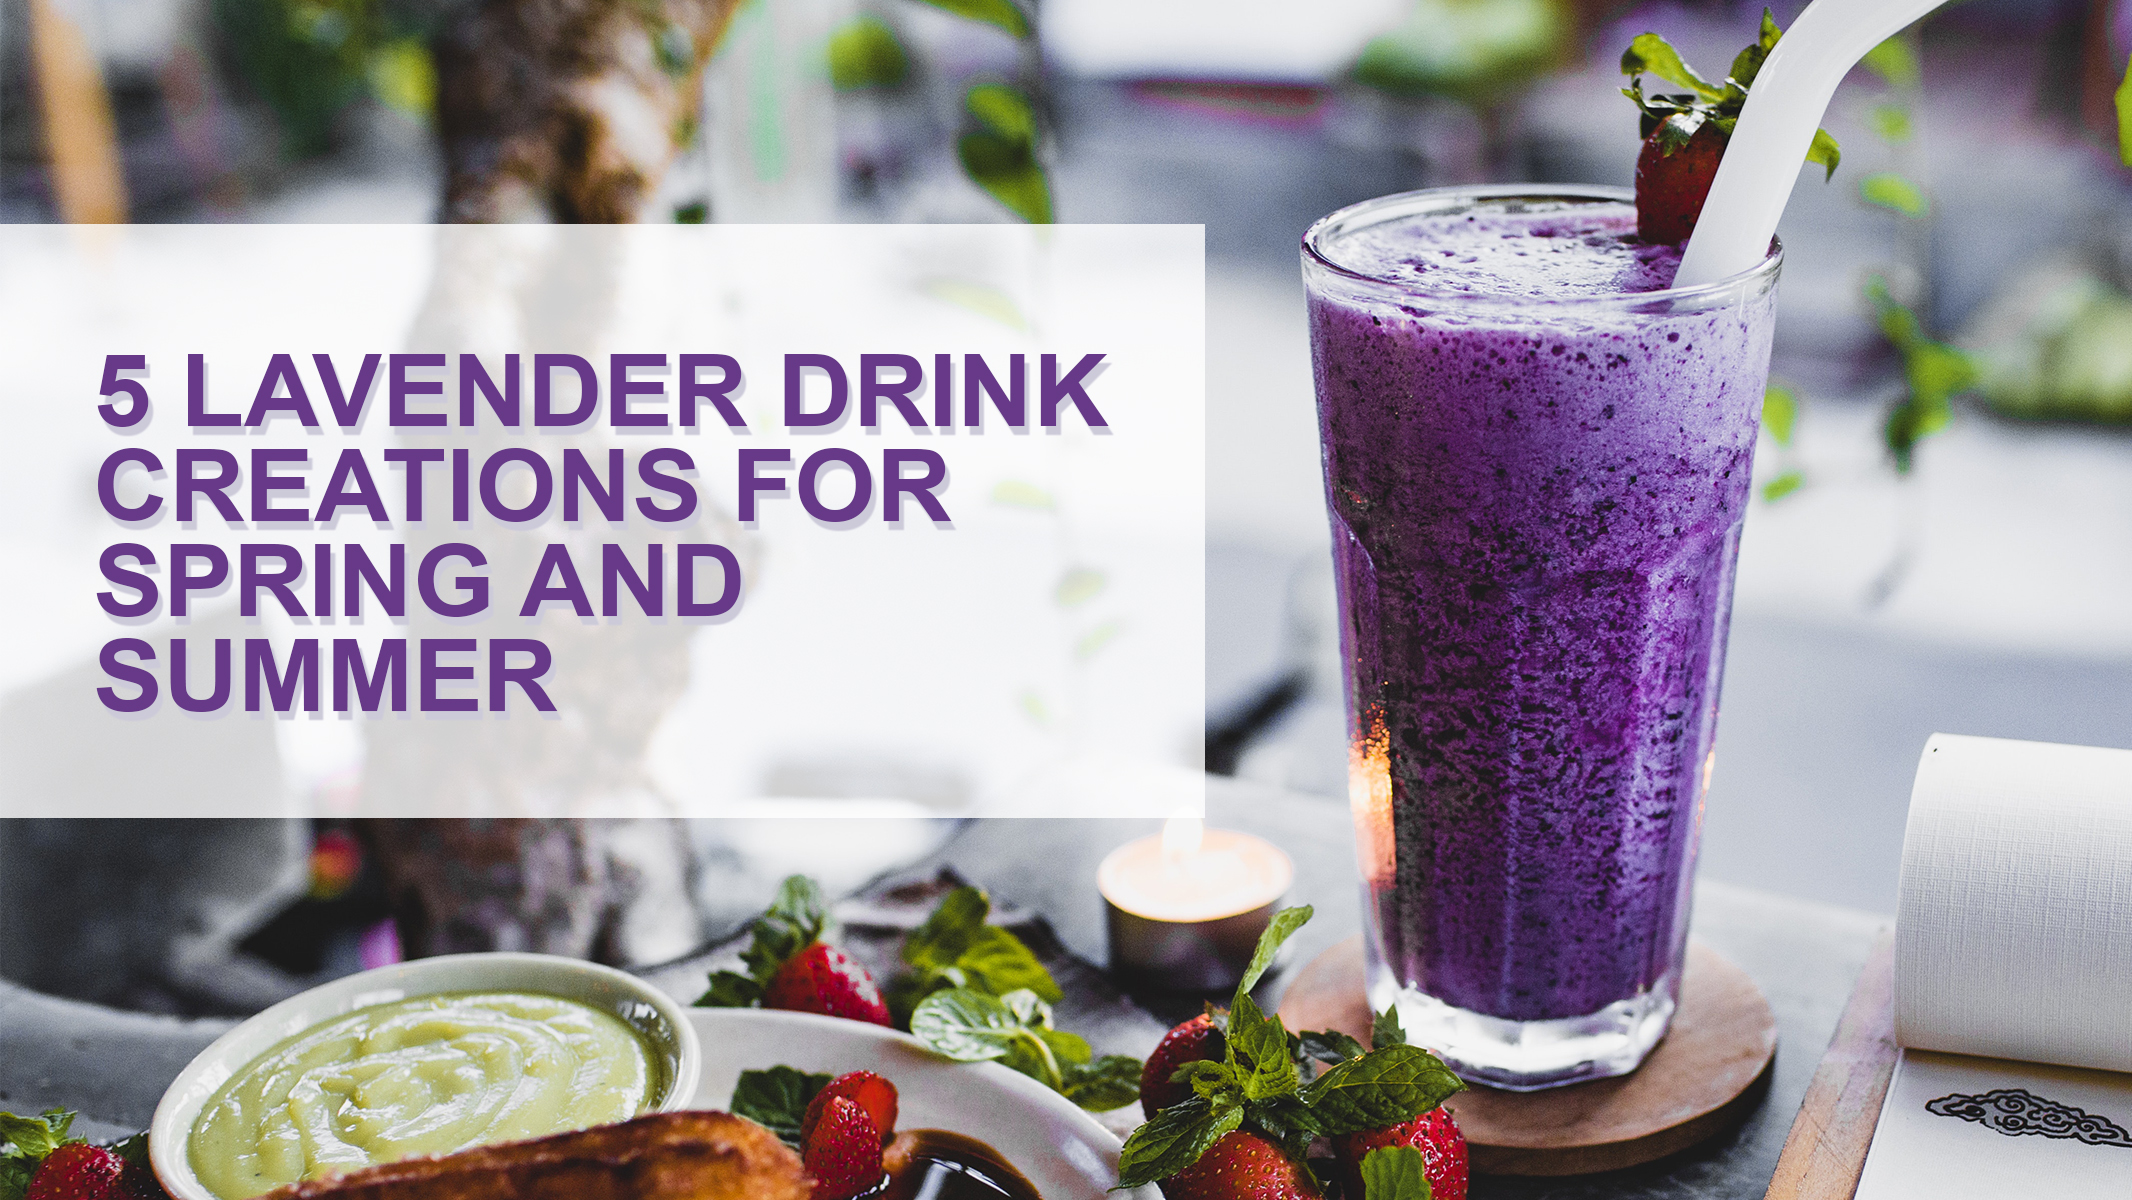 5 Lavender Drink Creations For Spring and Summer